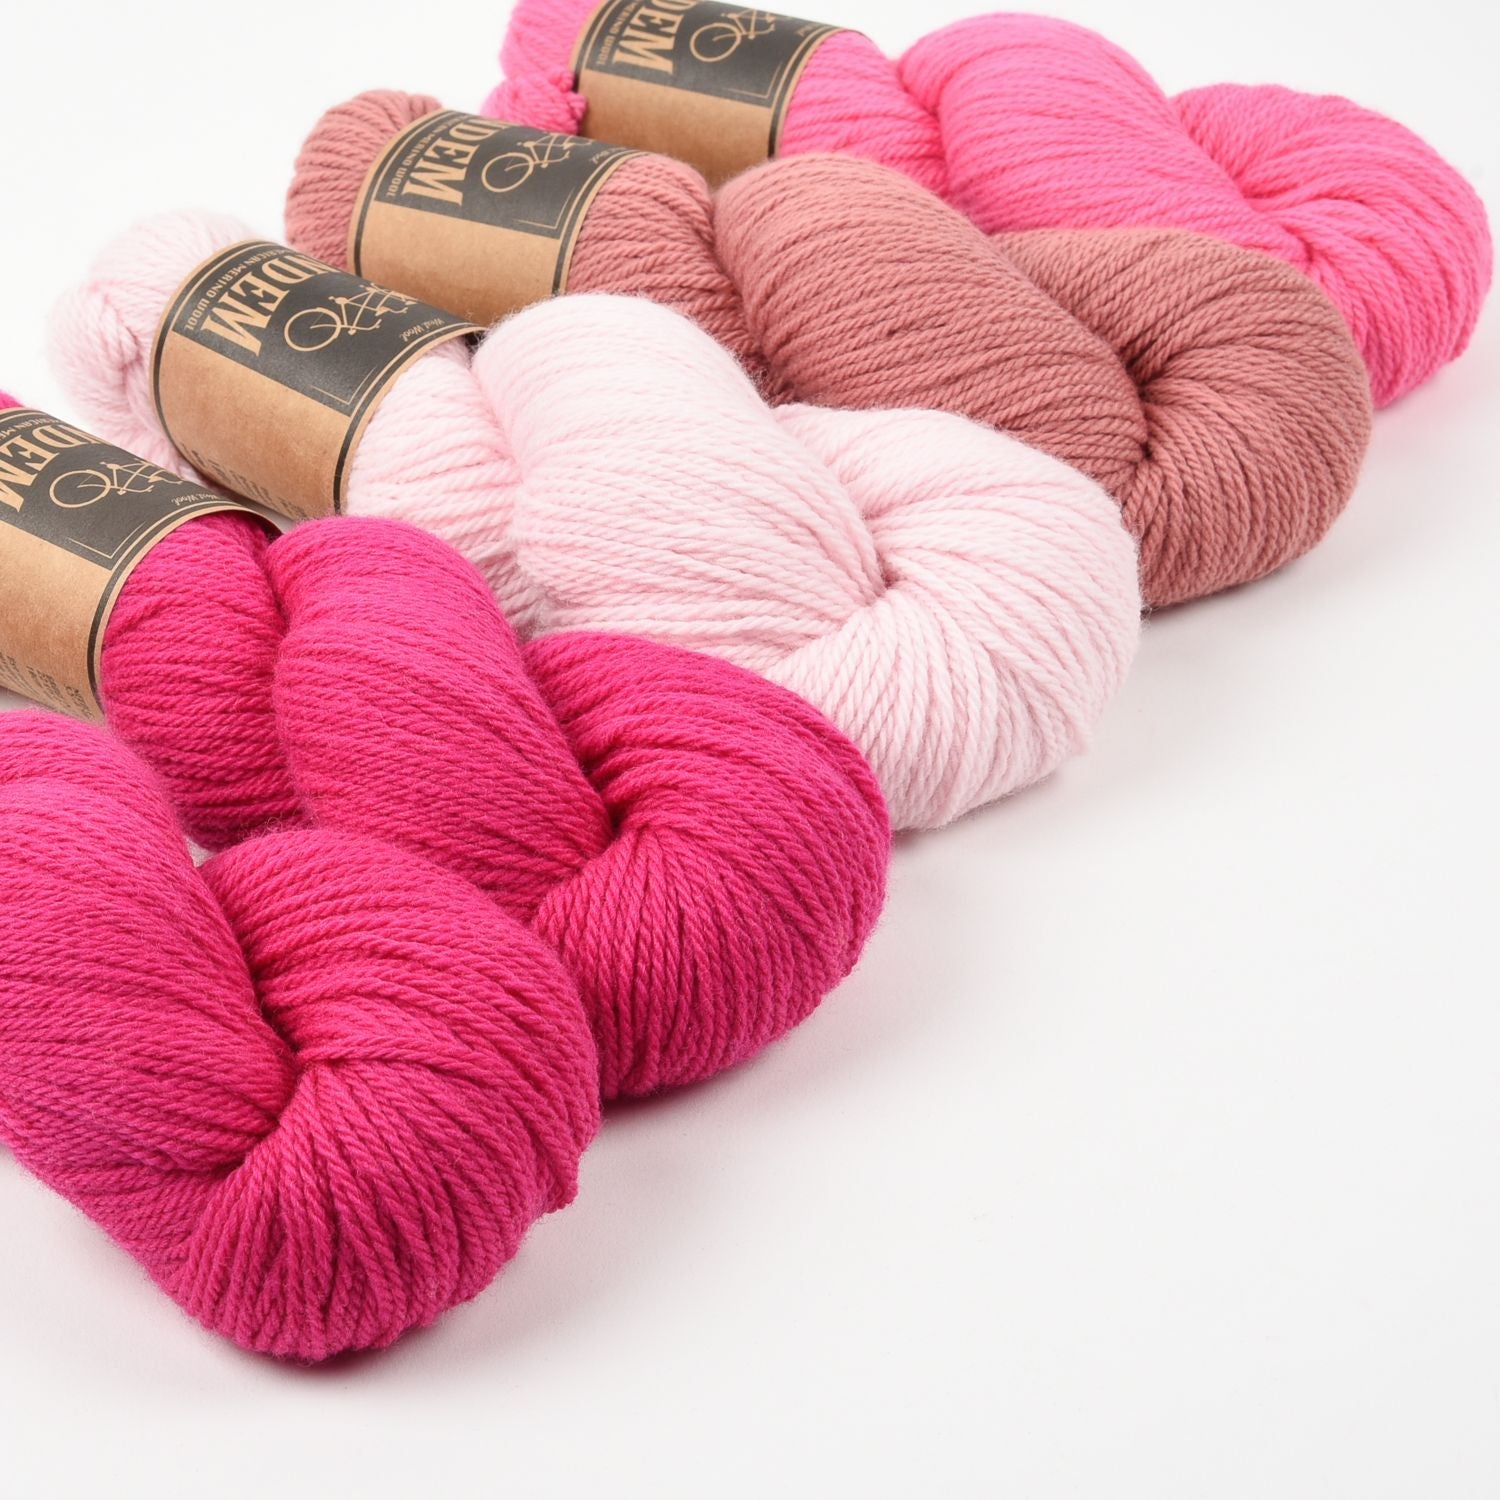 WESTKNITS KIT - IN THE PINK